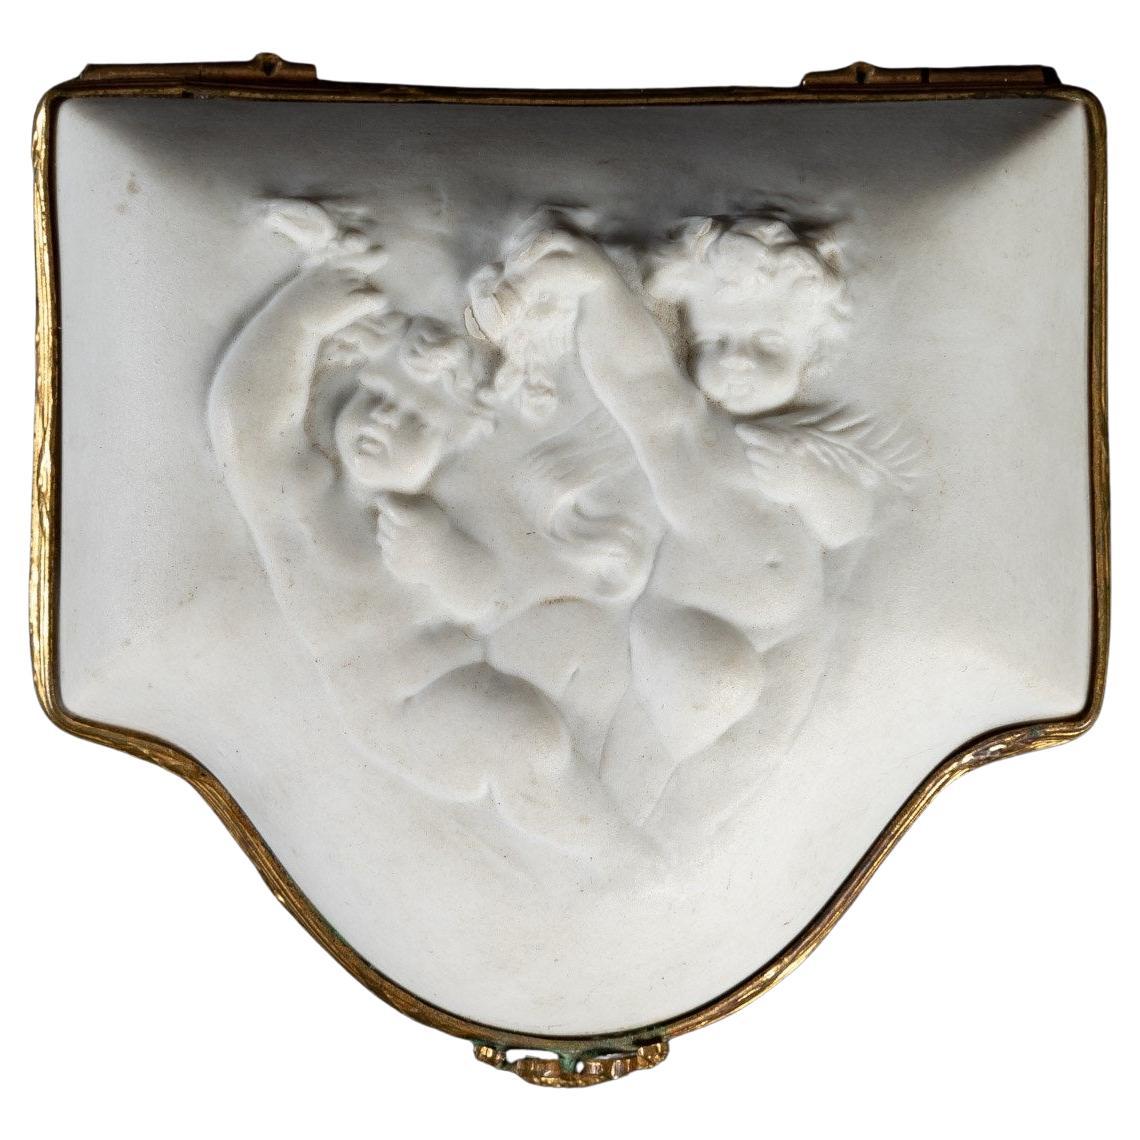 Jewelry box in biscuit of limoge end XIXth century flag.

Jewelry box in cookie of limoges 
Decorated with putti, Louis XVI style
End of XIXth century 

Ref 3227.